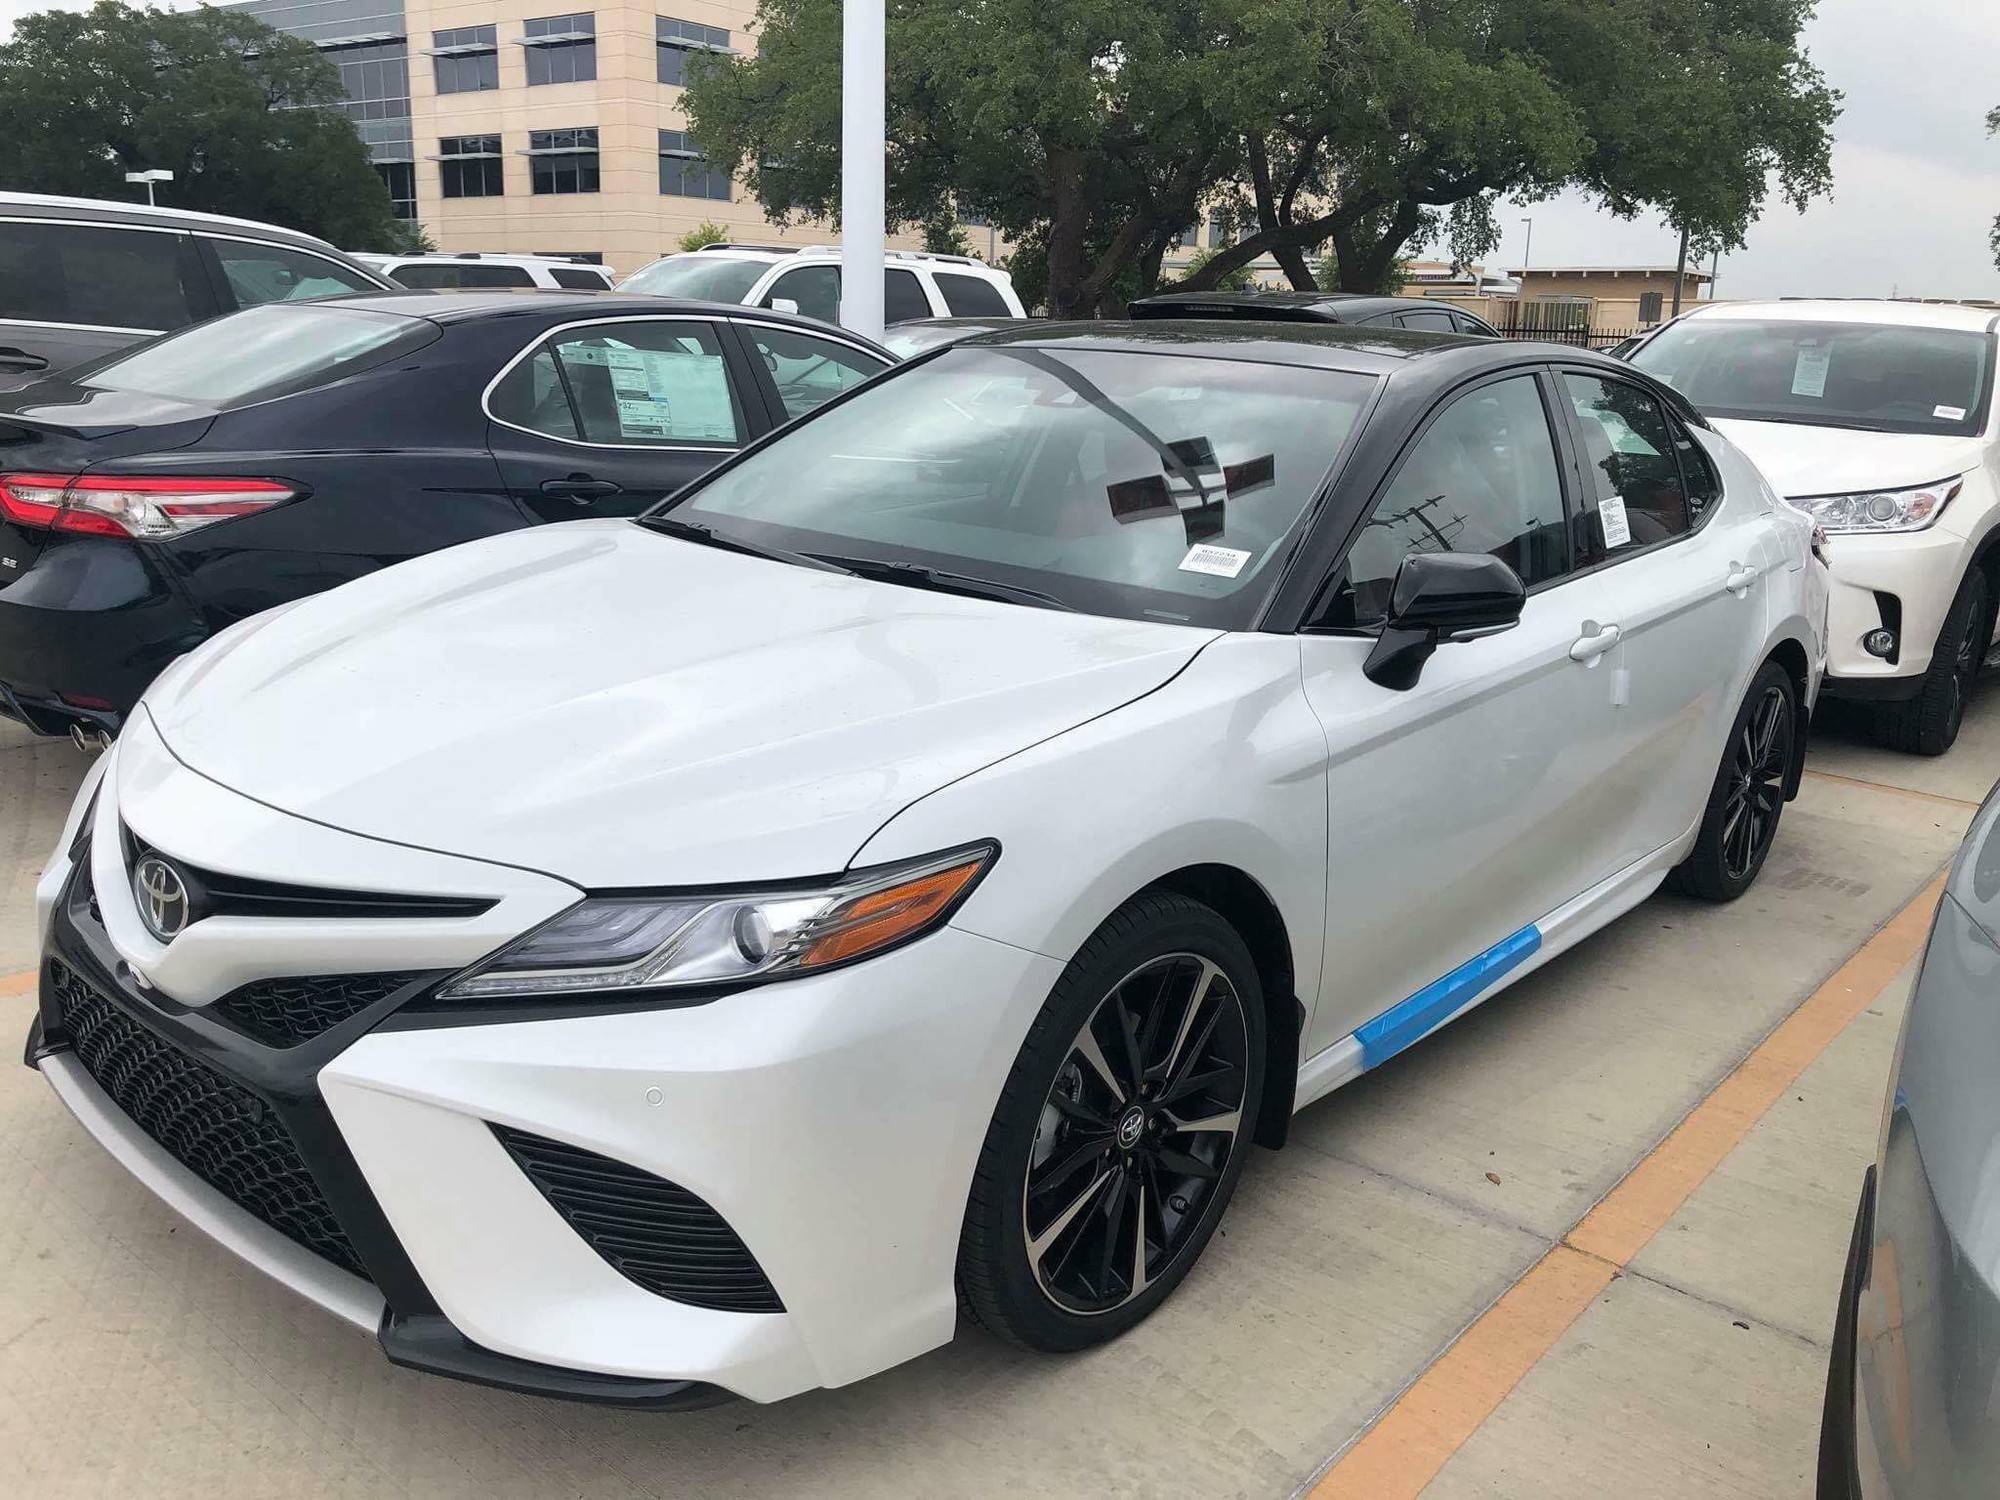 The 2018 Toyota Camry is Honored for its Interior Design  Western Slope  Toyota